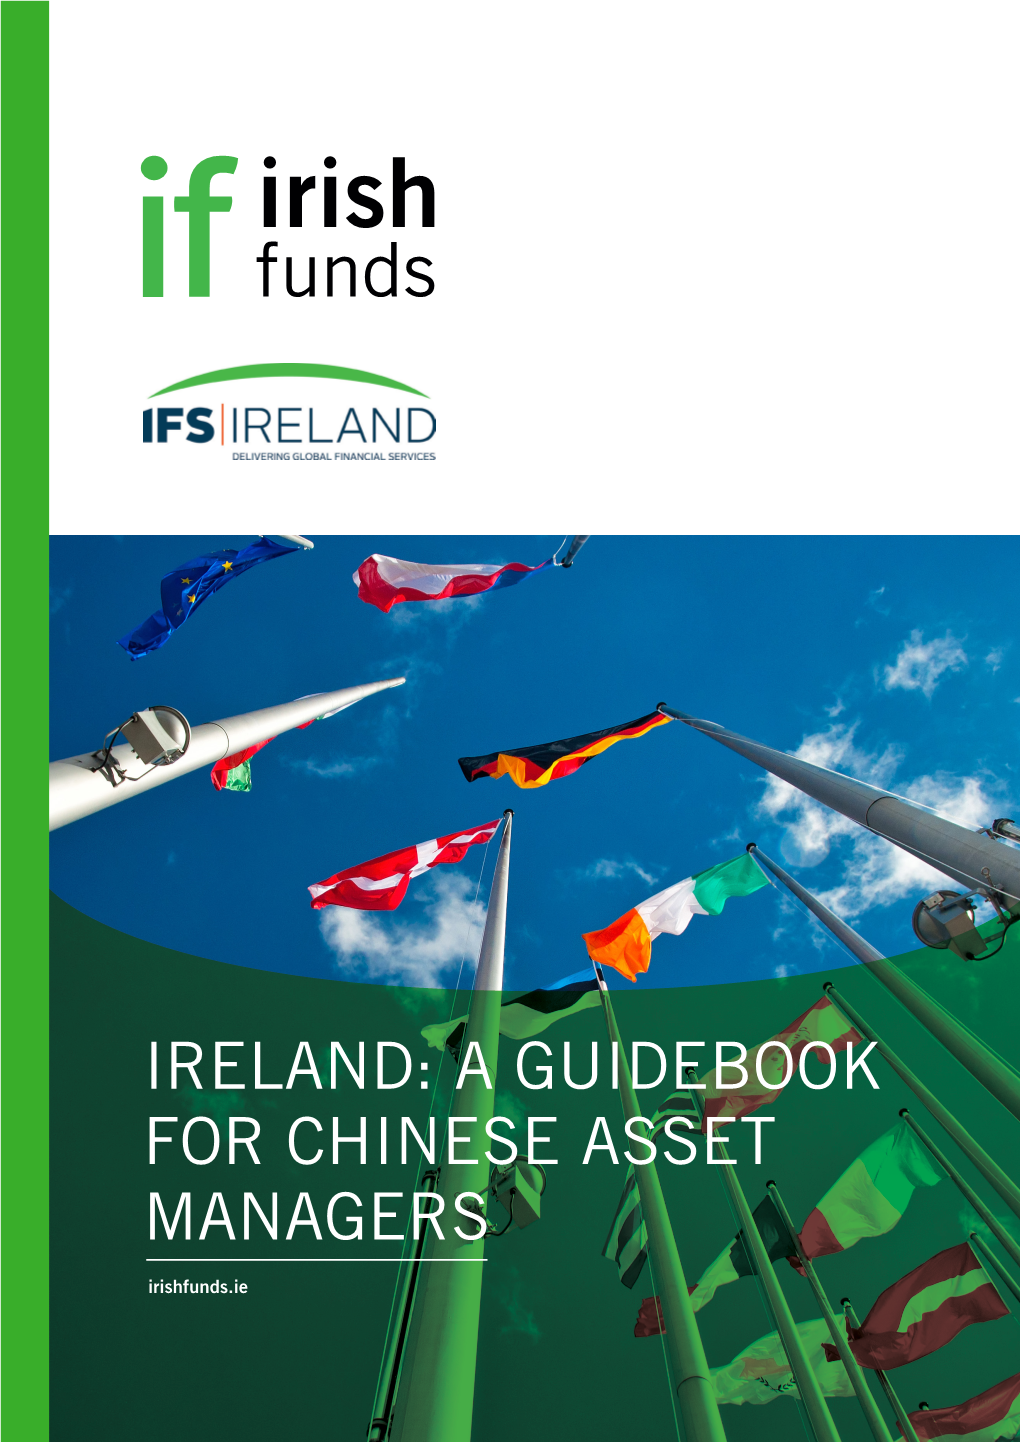 IRELAND: a GUIDEBOOK for CHINESE ASSET MANAGERS Irishfunds.Ie